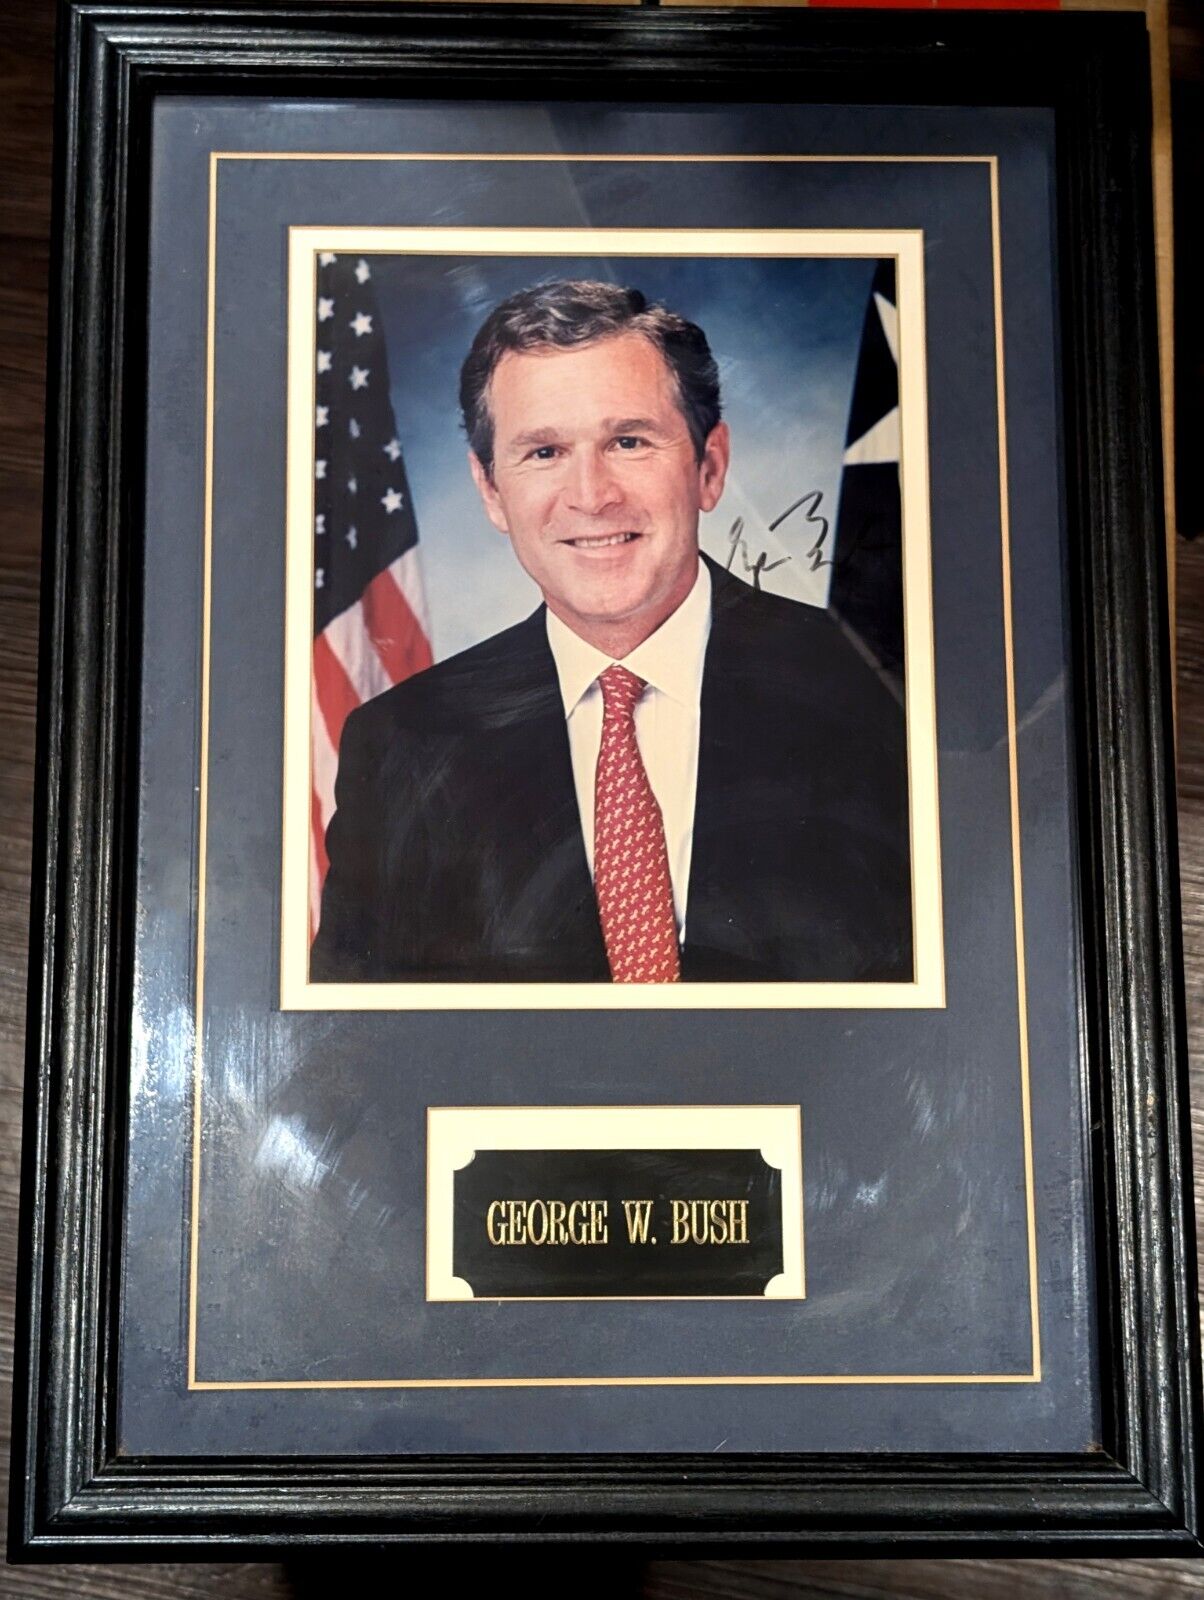 President George W. Bush HAND SIGNED Autograph Matted Framed Autographed Photo